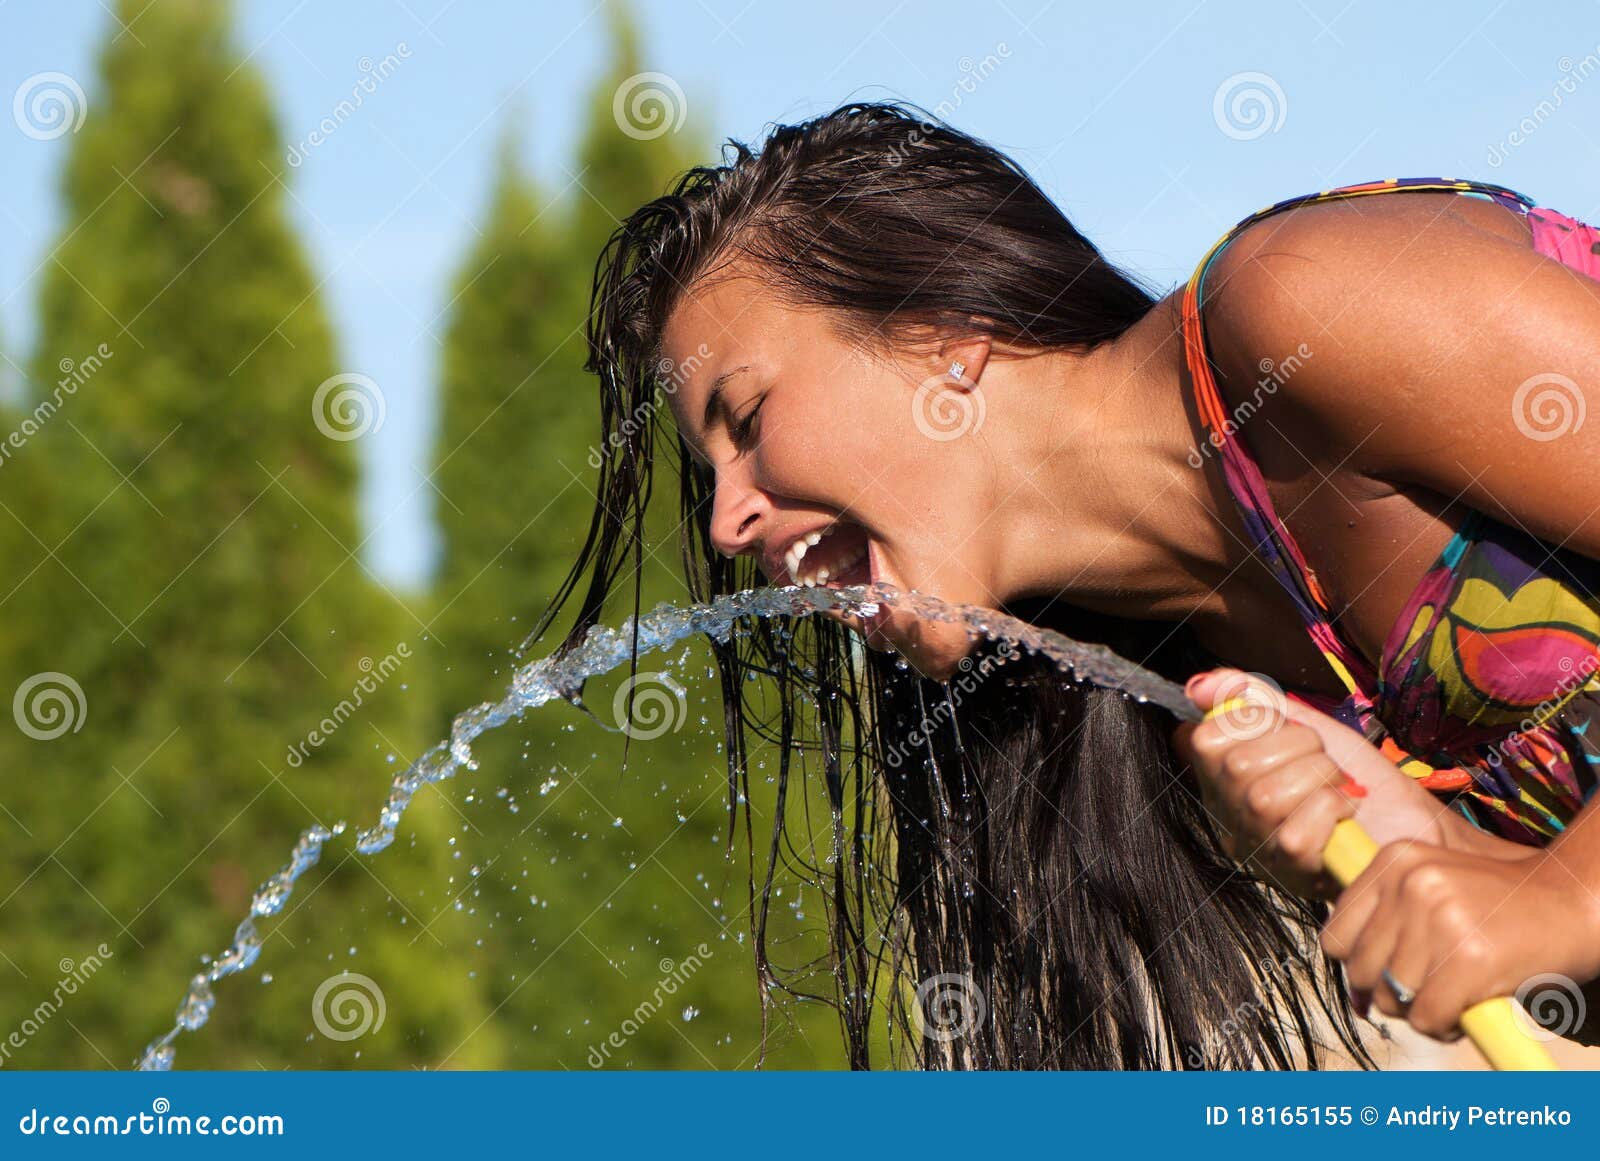 girl drinking water from a hose